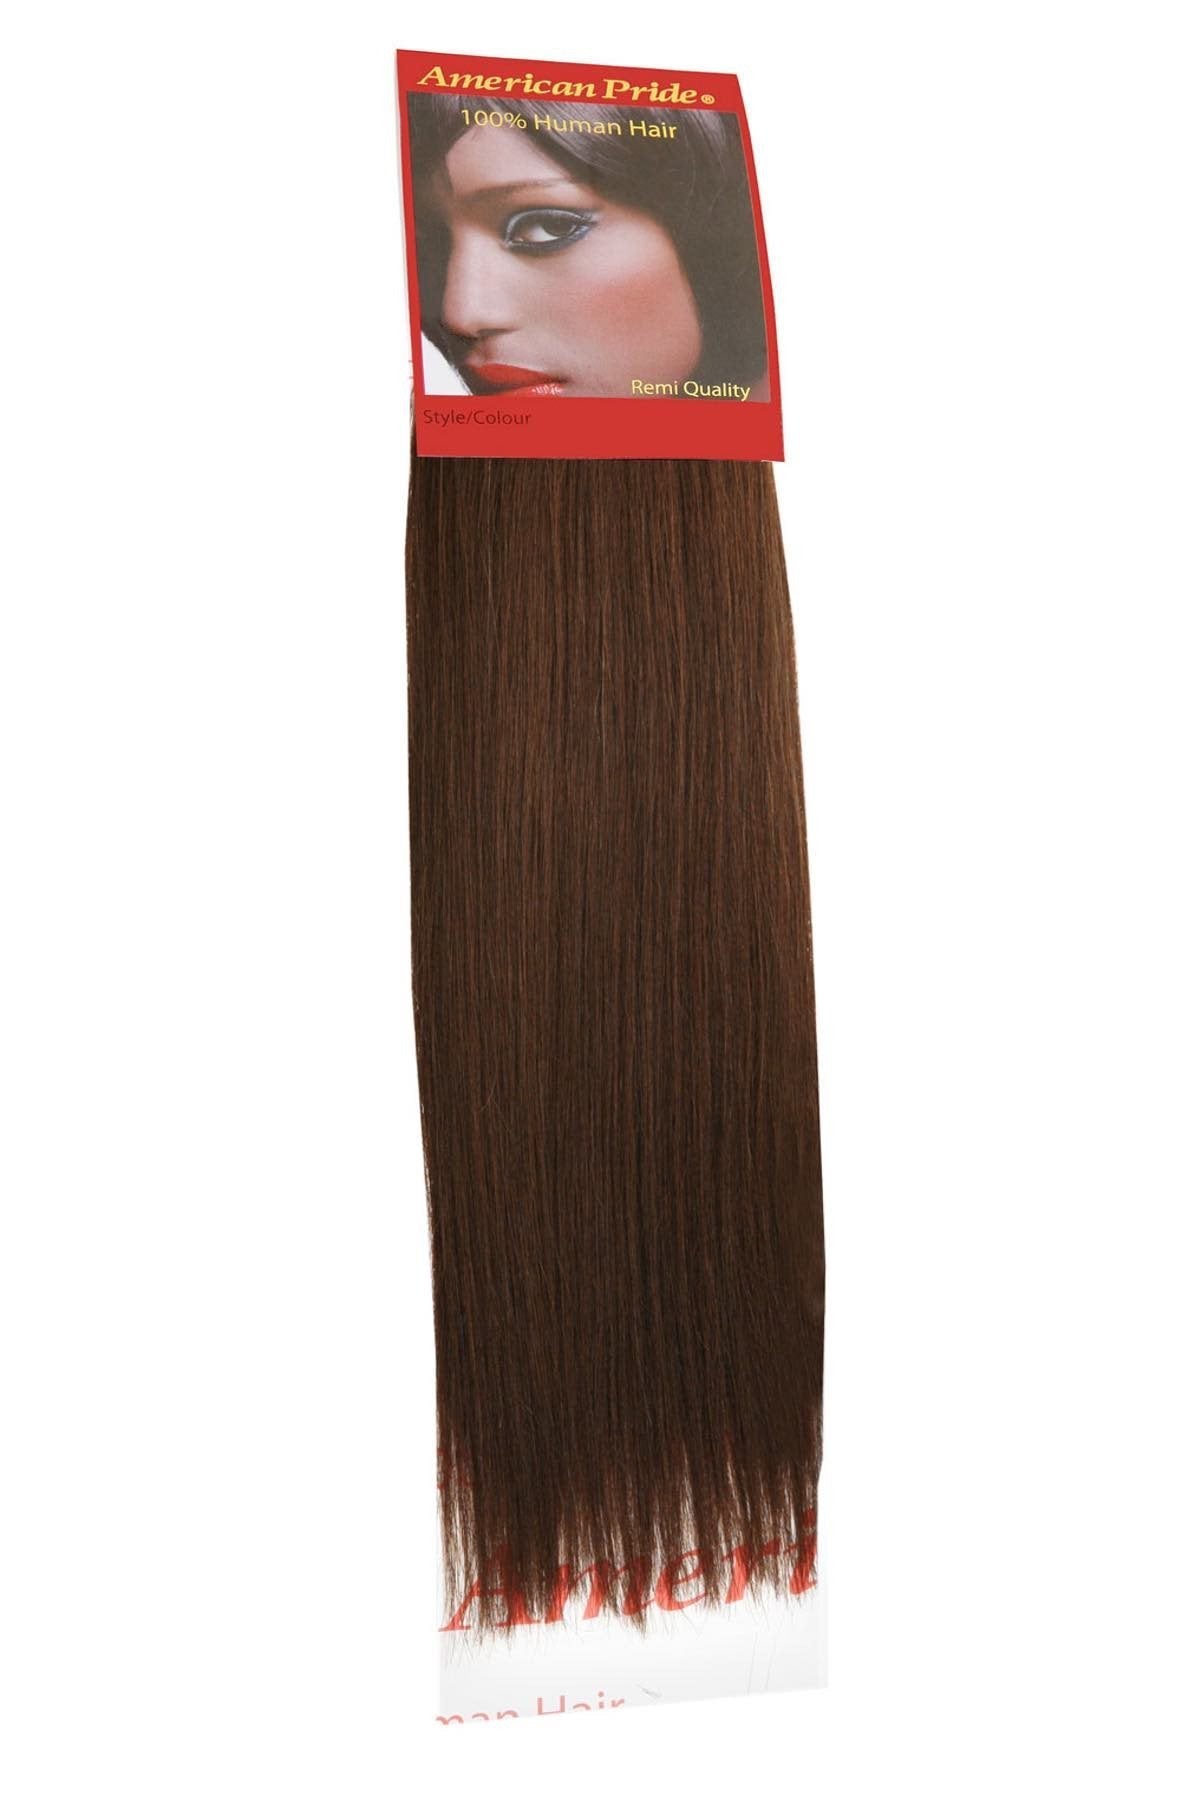 Yaki Weave | Human Hair Extensions | 10 Inch | Dark Brown (3) - Beauty Hair Products LtdHair Extensions